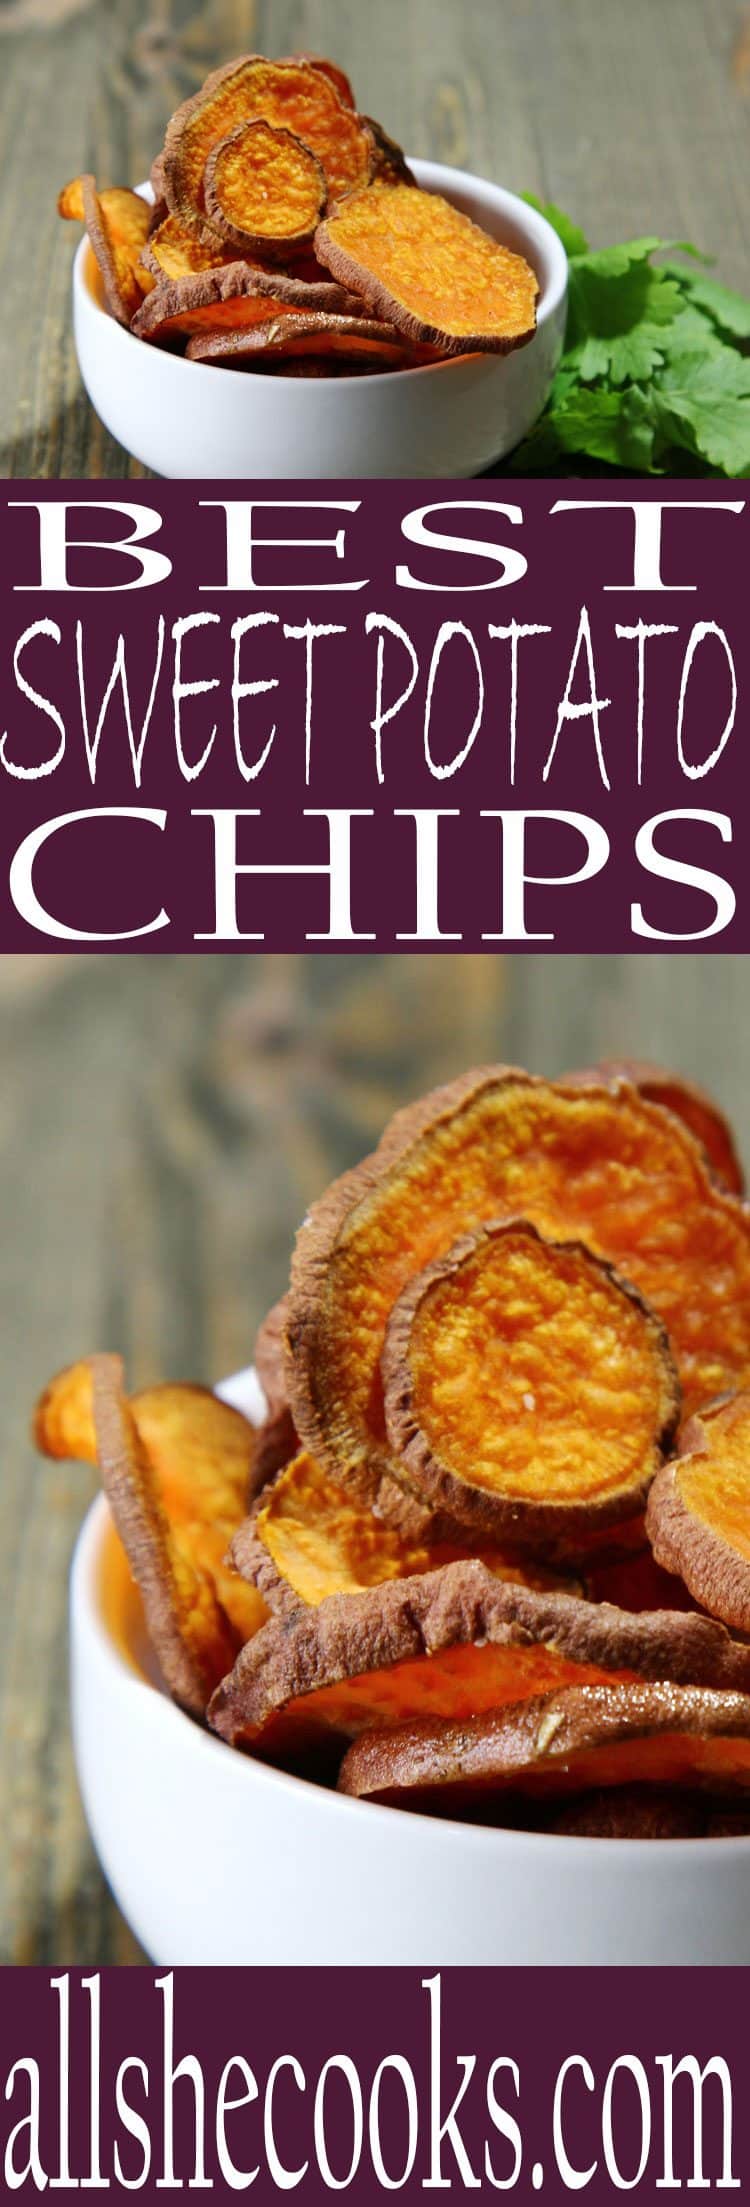 Make these healthy baked sweet potato chips in the oven or your excalibur dehydrator. Best sweet potato chips recipe ever.